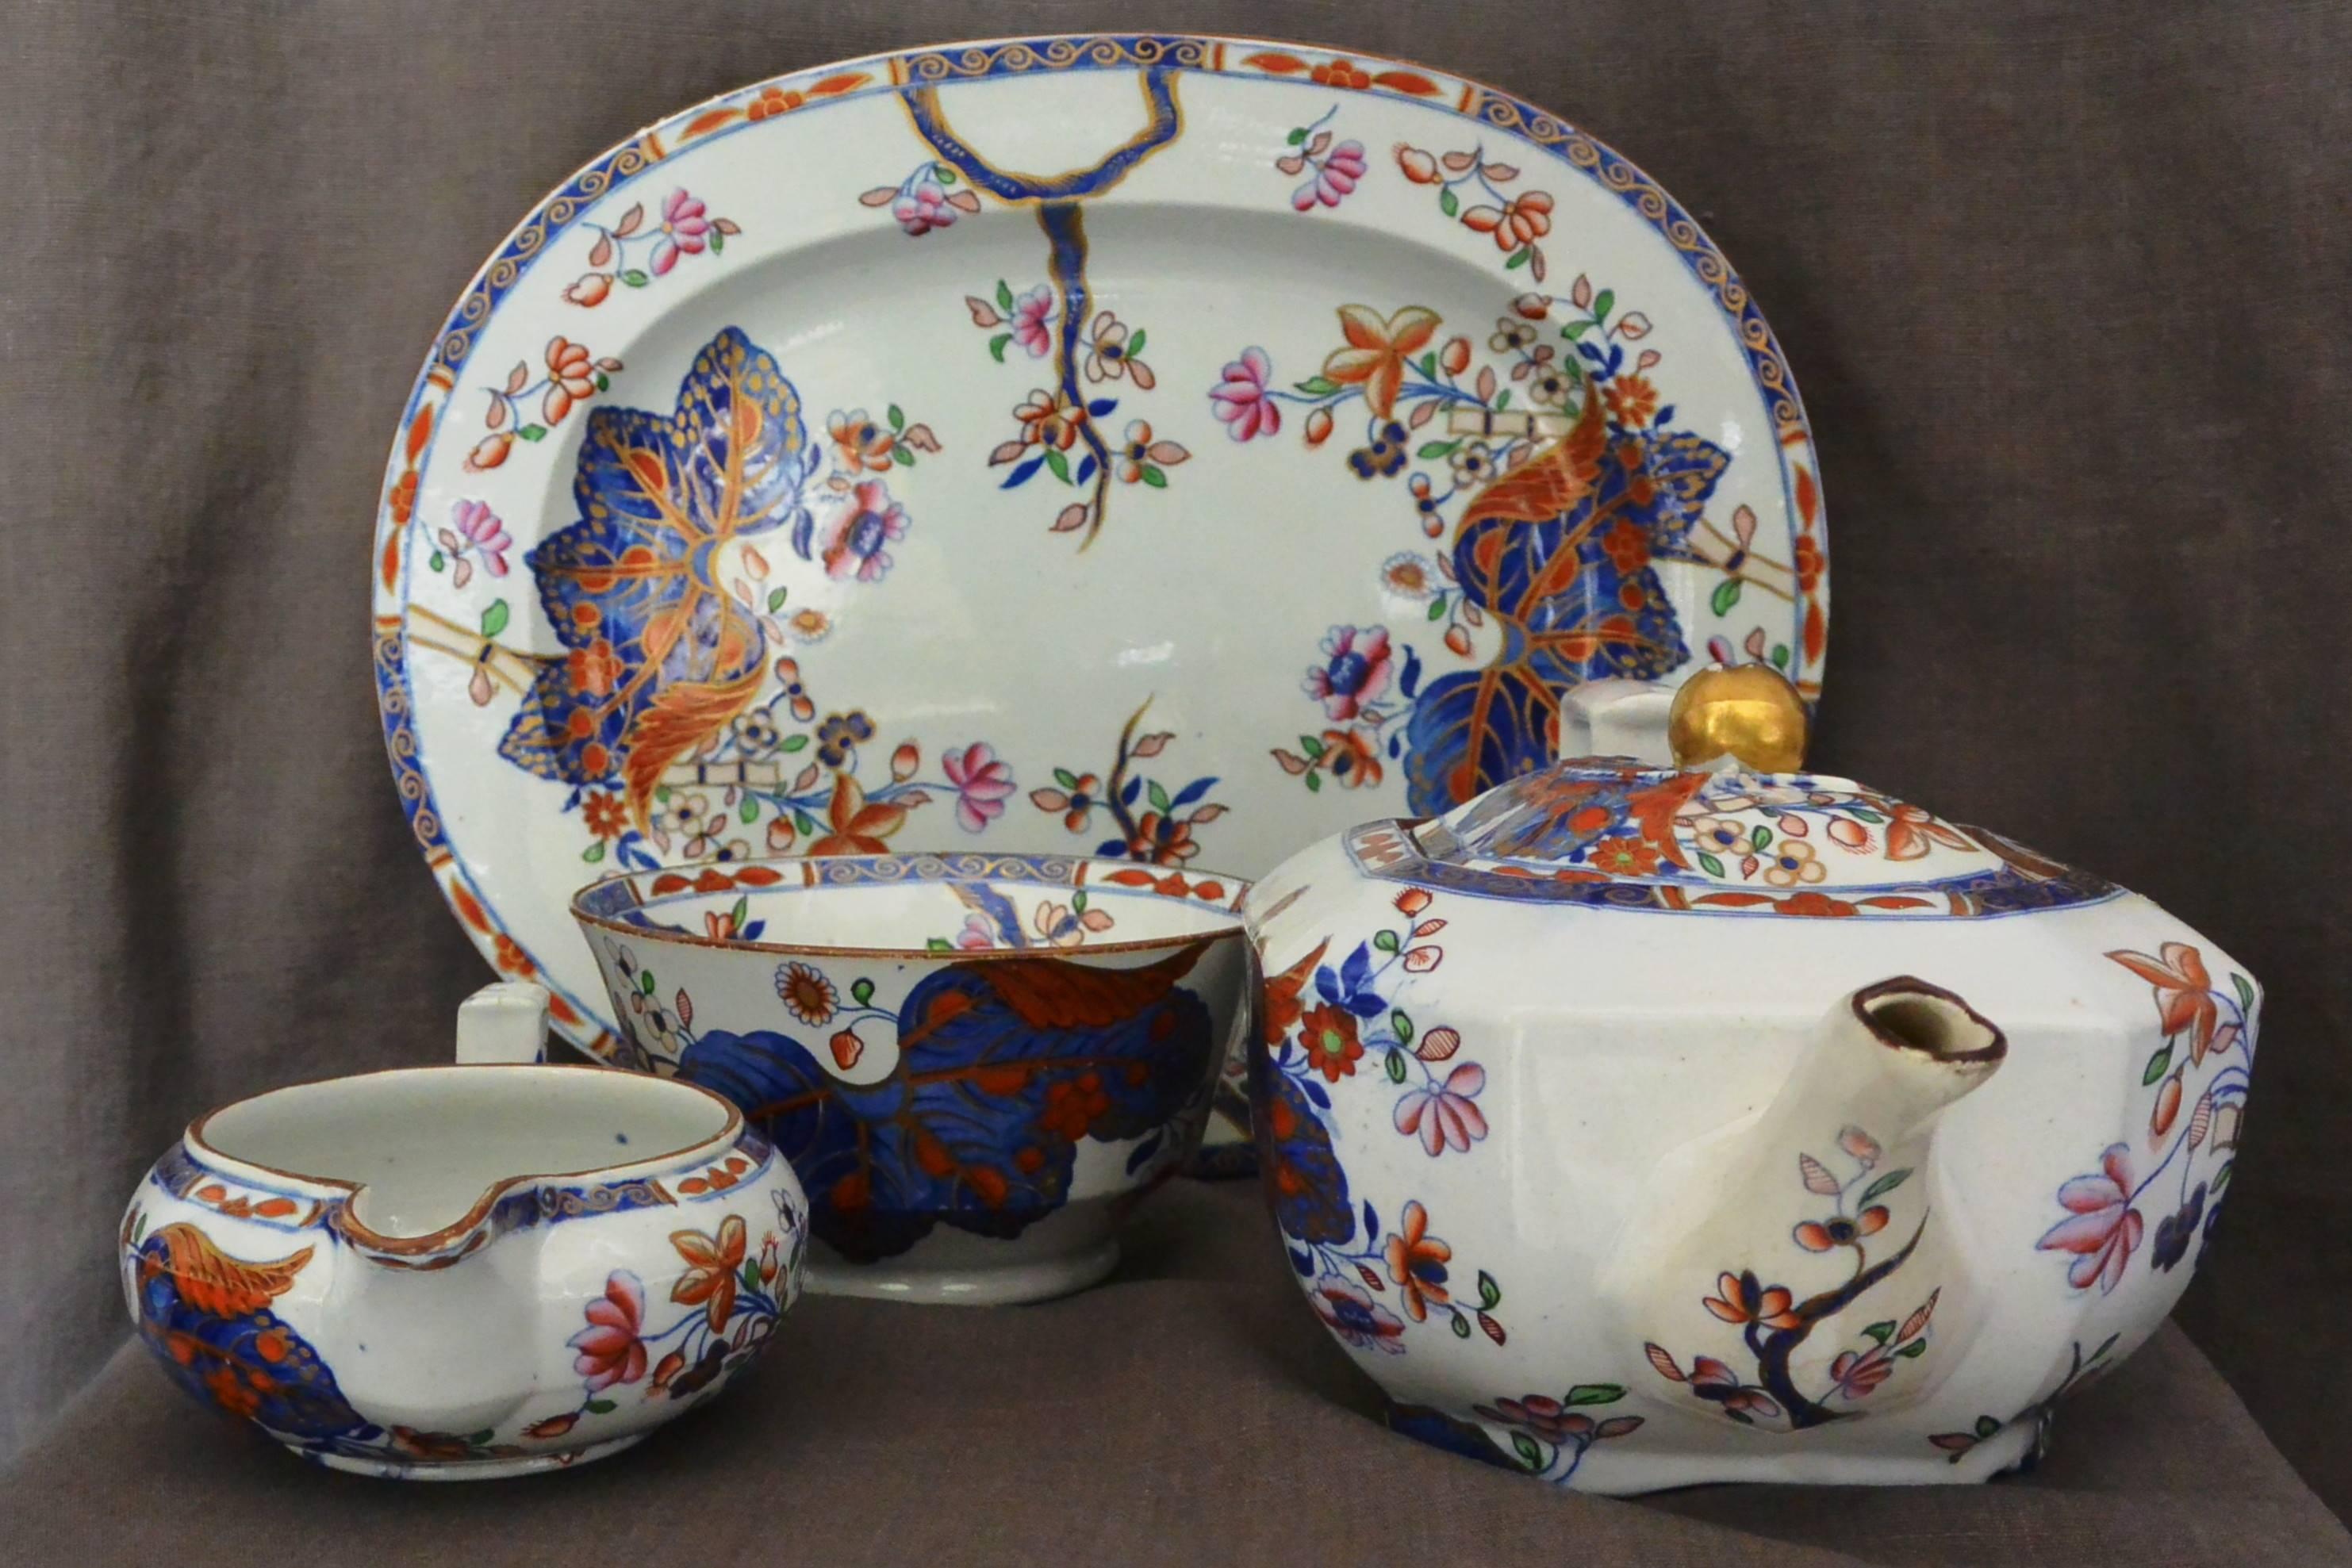 Antique Copeland Spode tobacco leaf or cabbage leaf tea pot, cookie platter, creamer and sugar bowl in blue, red, peach, pink and green with gilt highlighting. Markings for Spode in underglaze blue and pattern 2061 in underglaze red.
Dimension:
1.